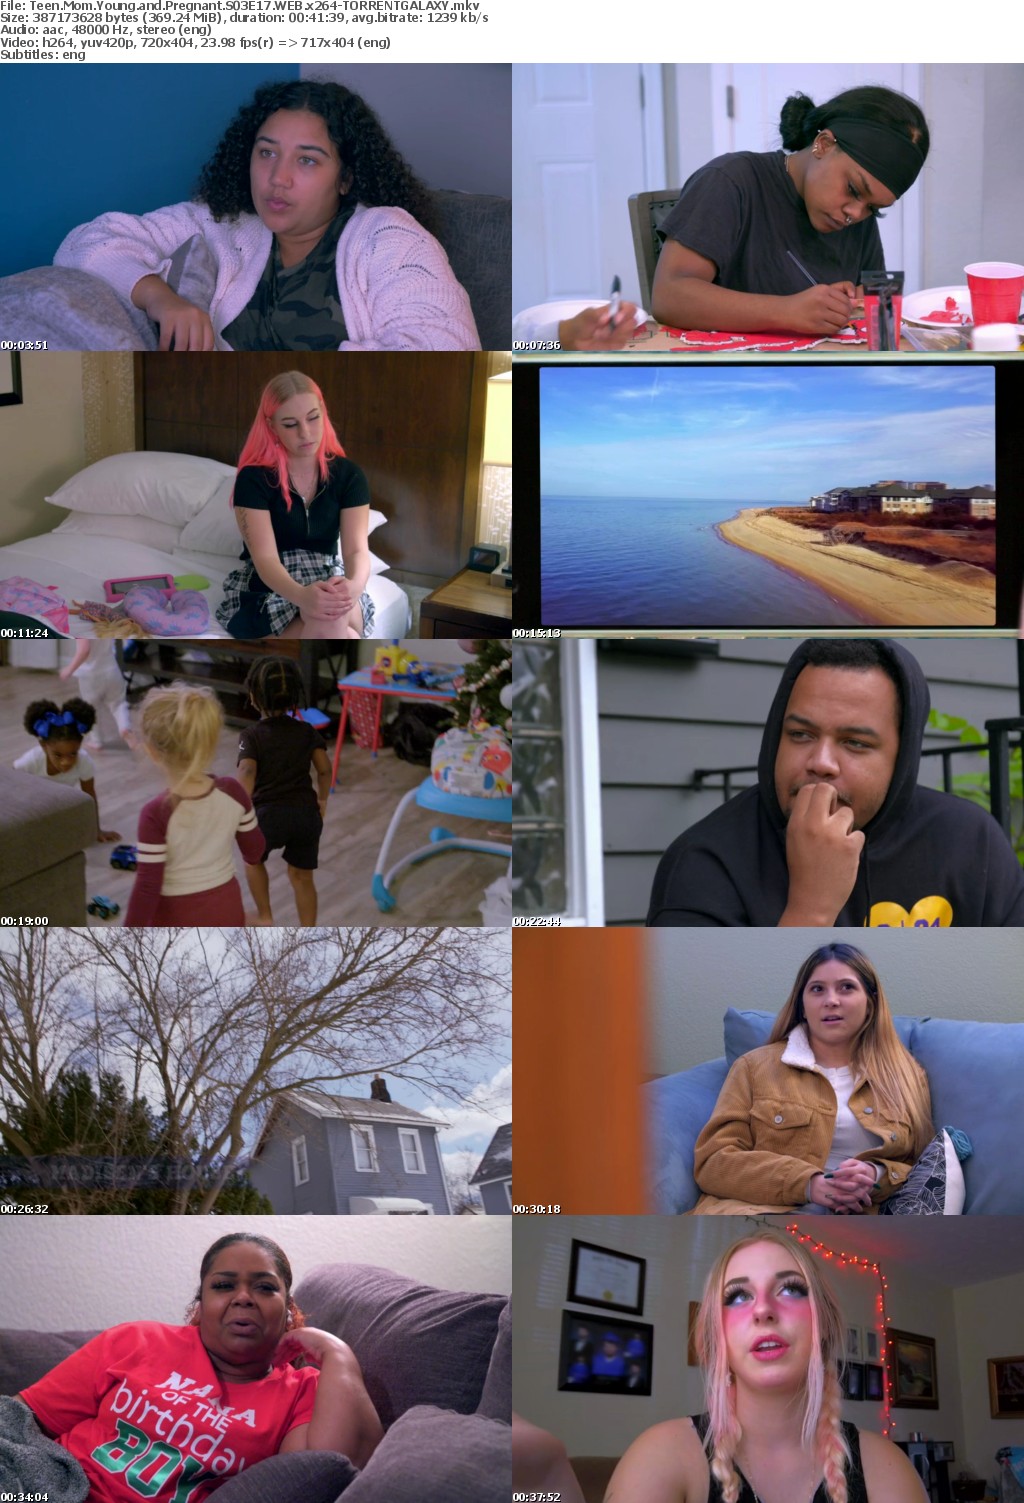 Teen Mom Young and Pregnant S03E17 WEB x264-GALAXY